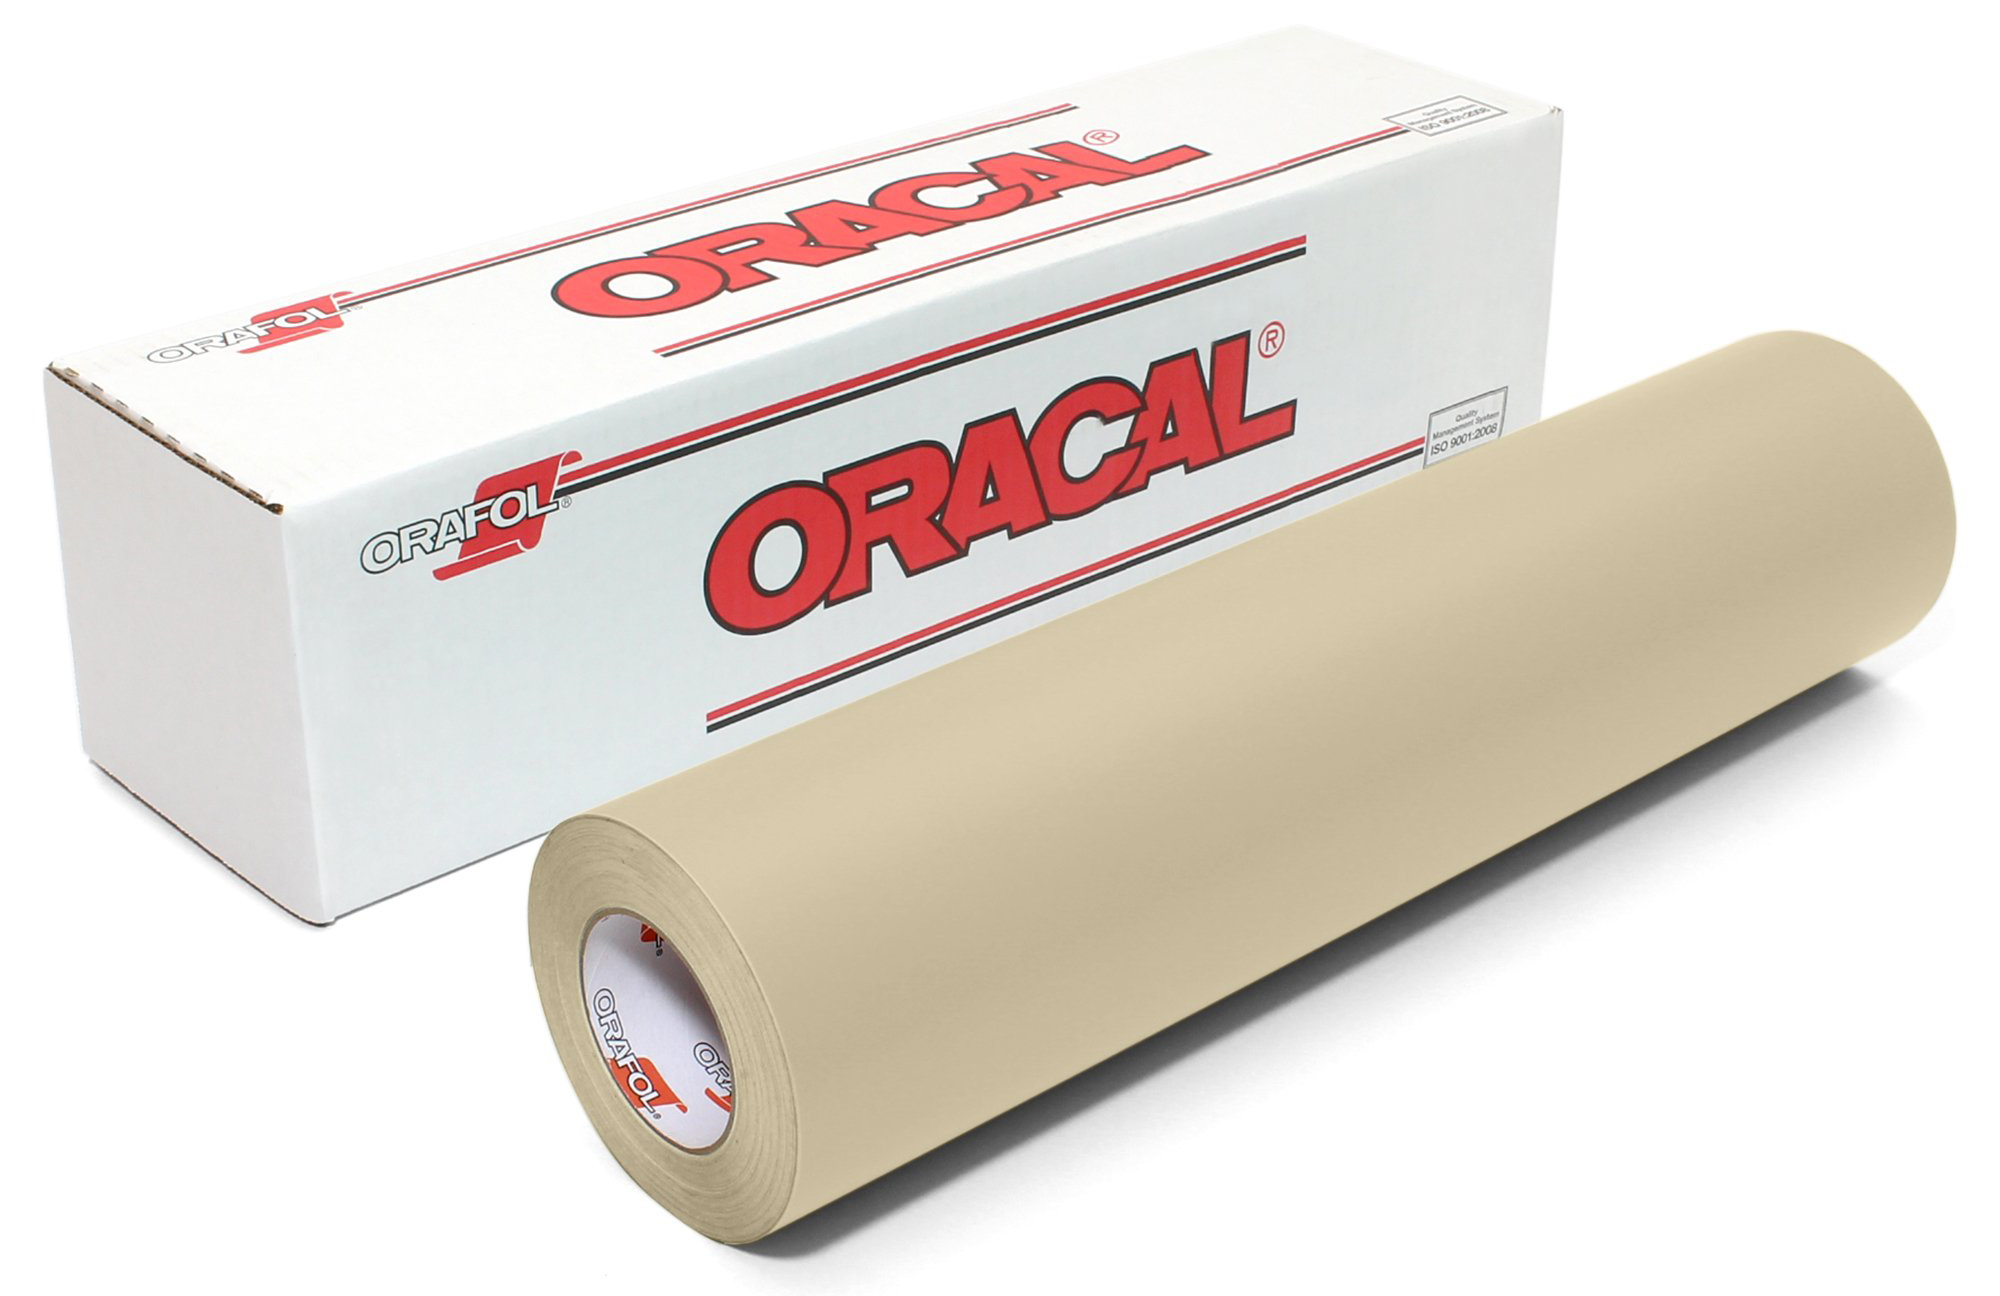 30IN BEIGE 631 EXHIBITION CAL - Oracal 631 Exhibition Calendered PVC Film